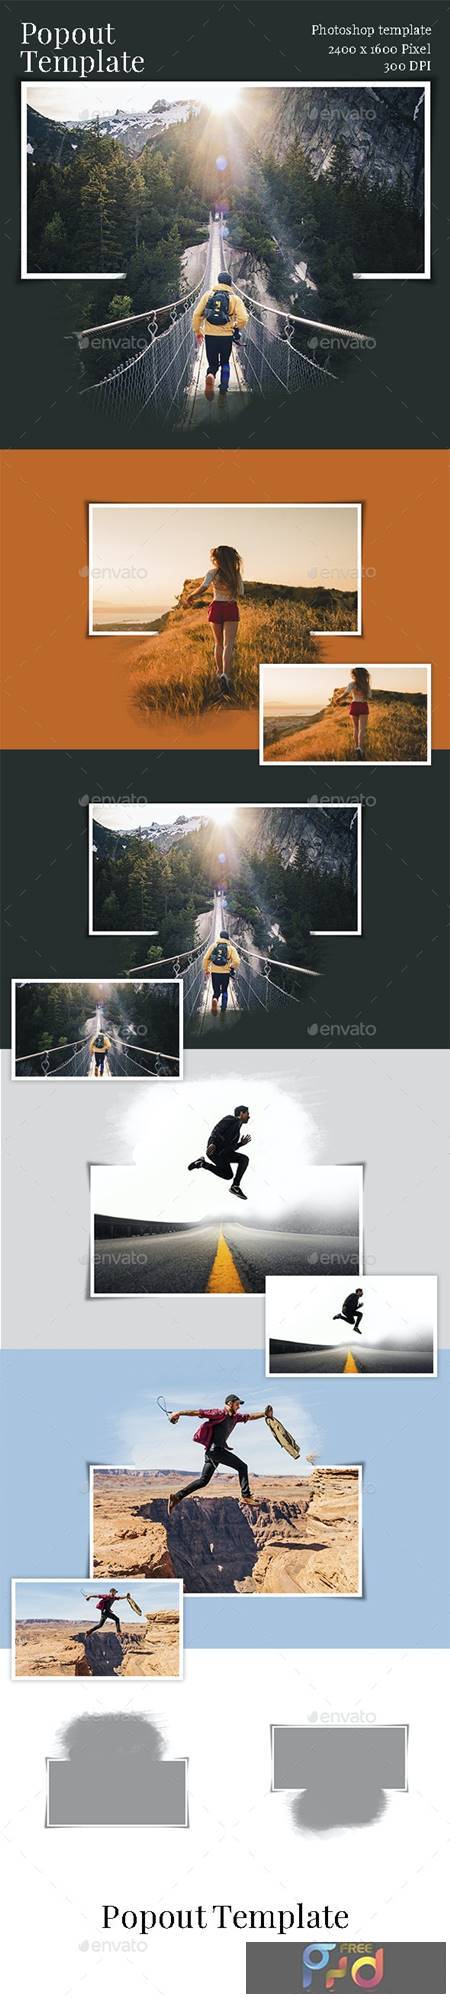 Popout Photo Template 32807988 1